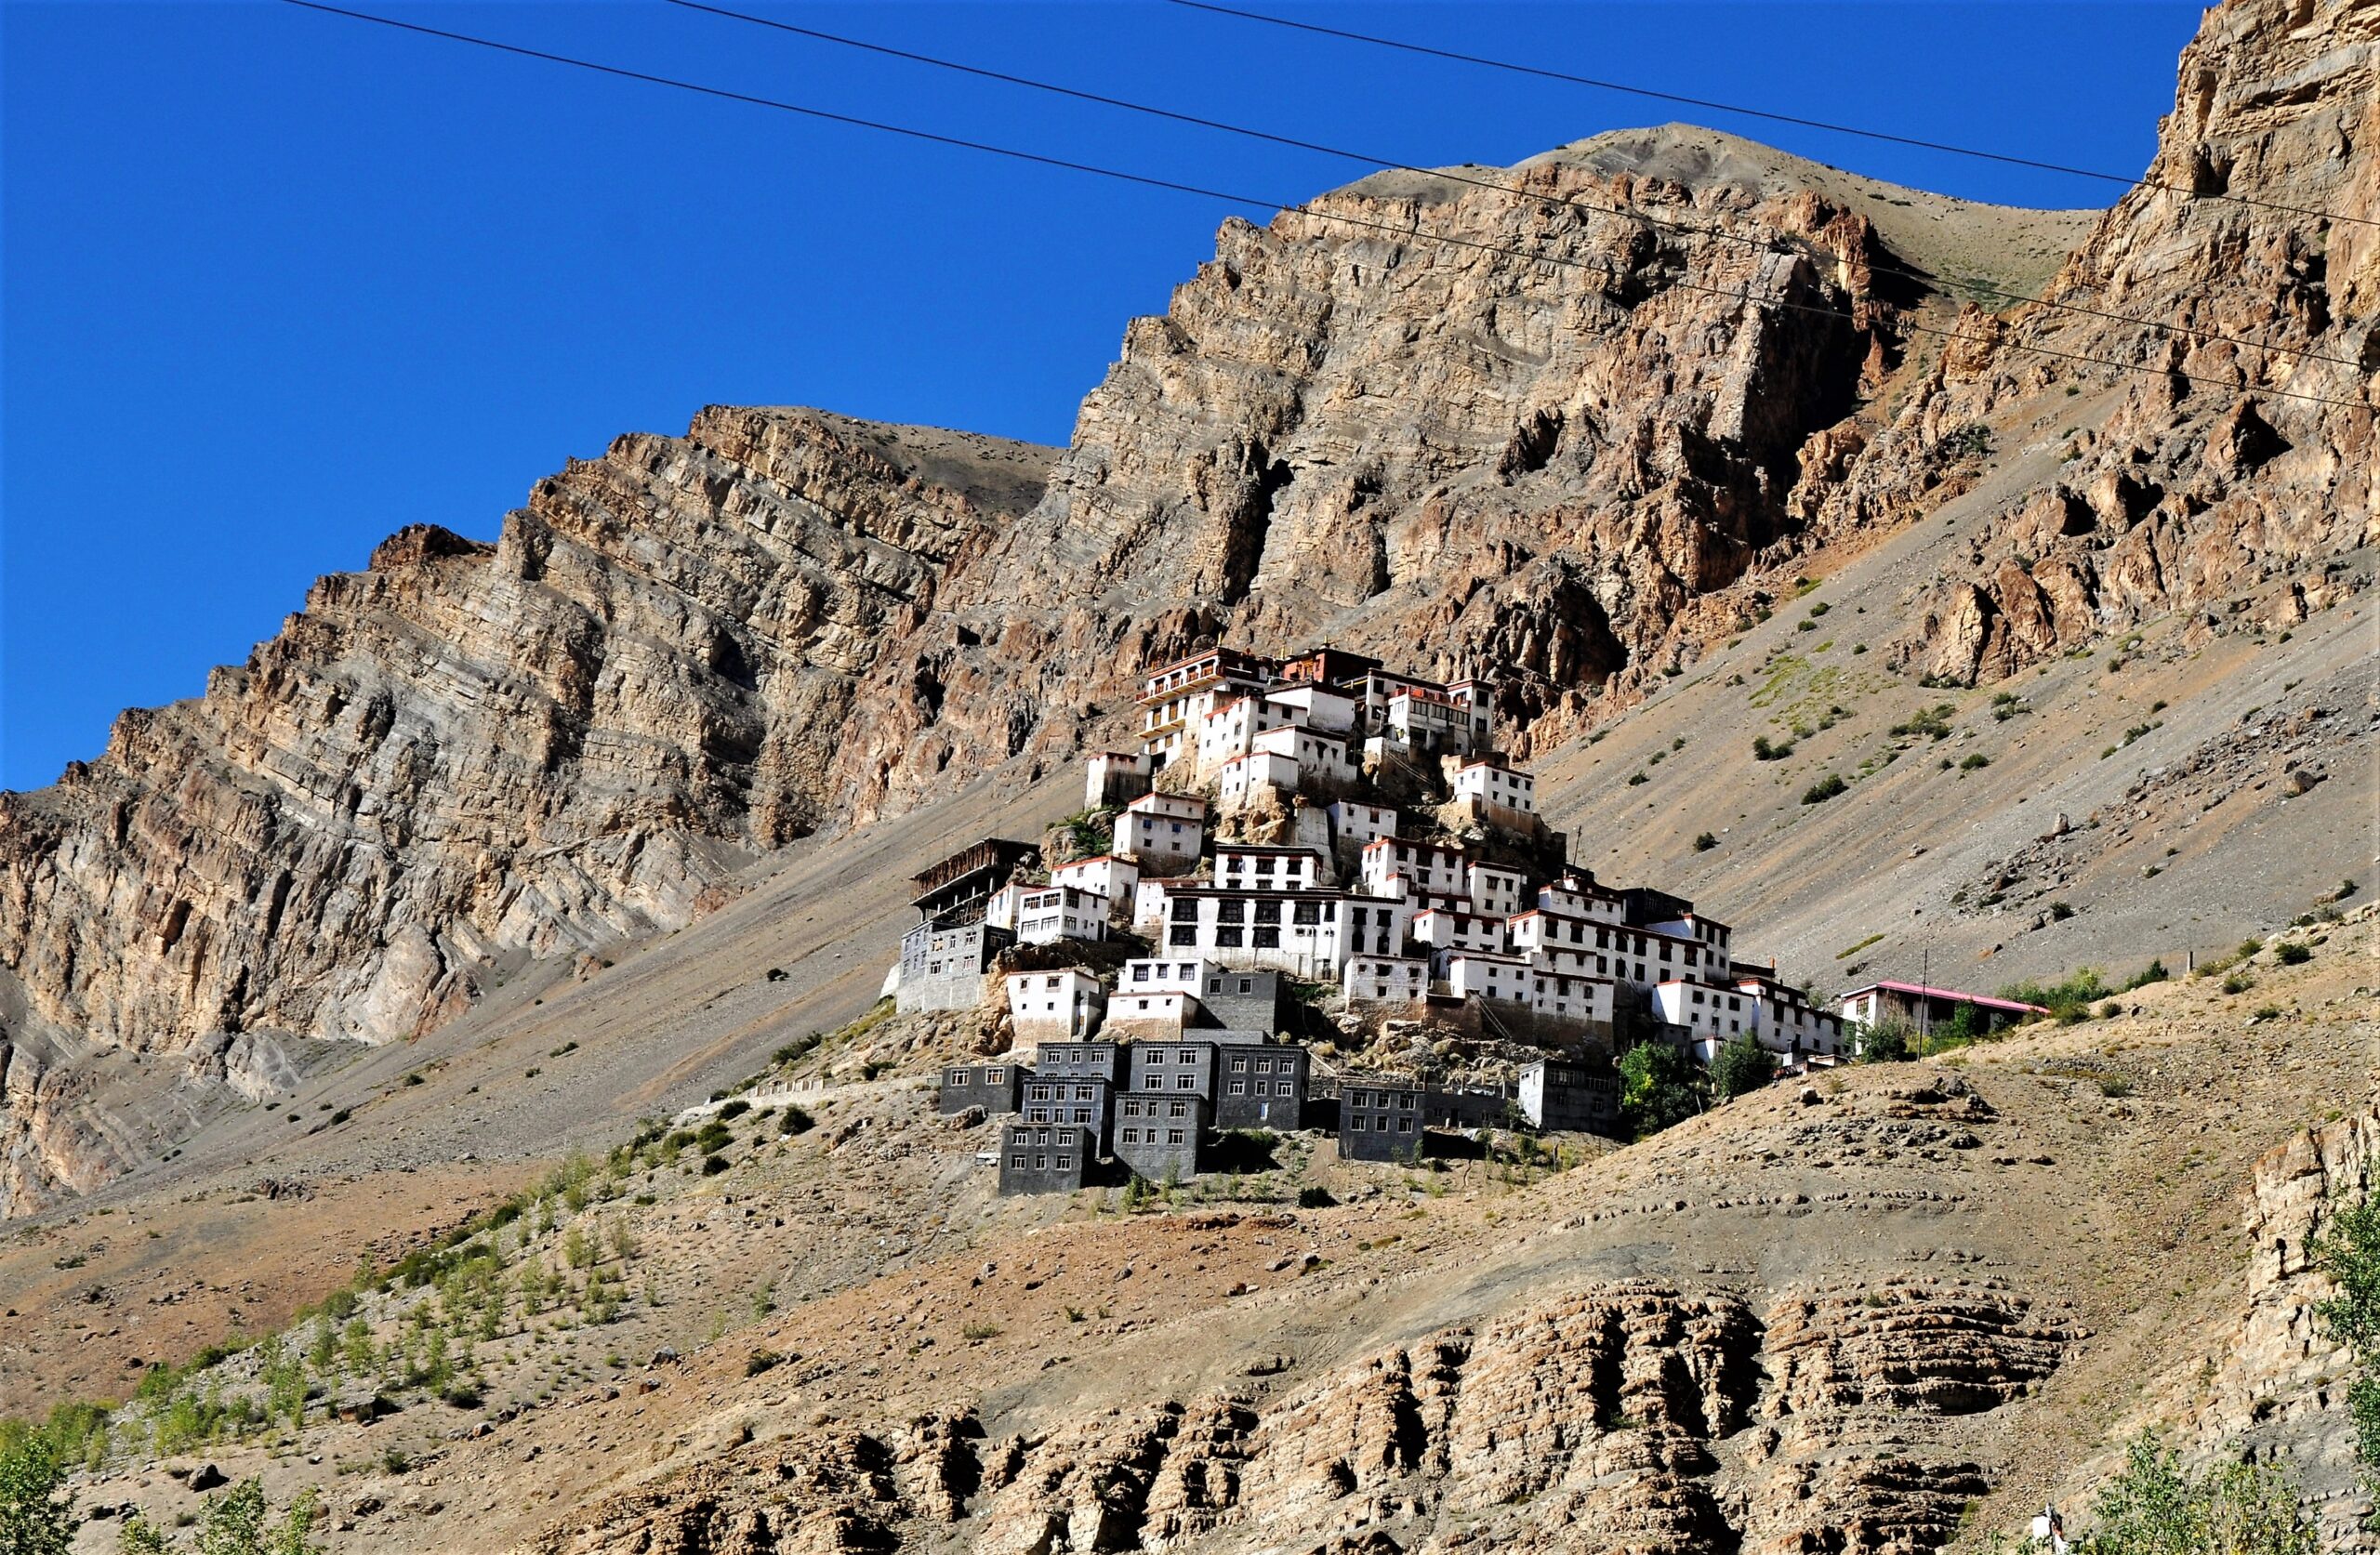 <strong>SPITI VALLEY</strong>